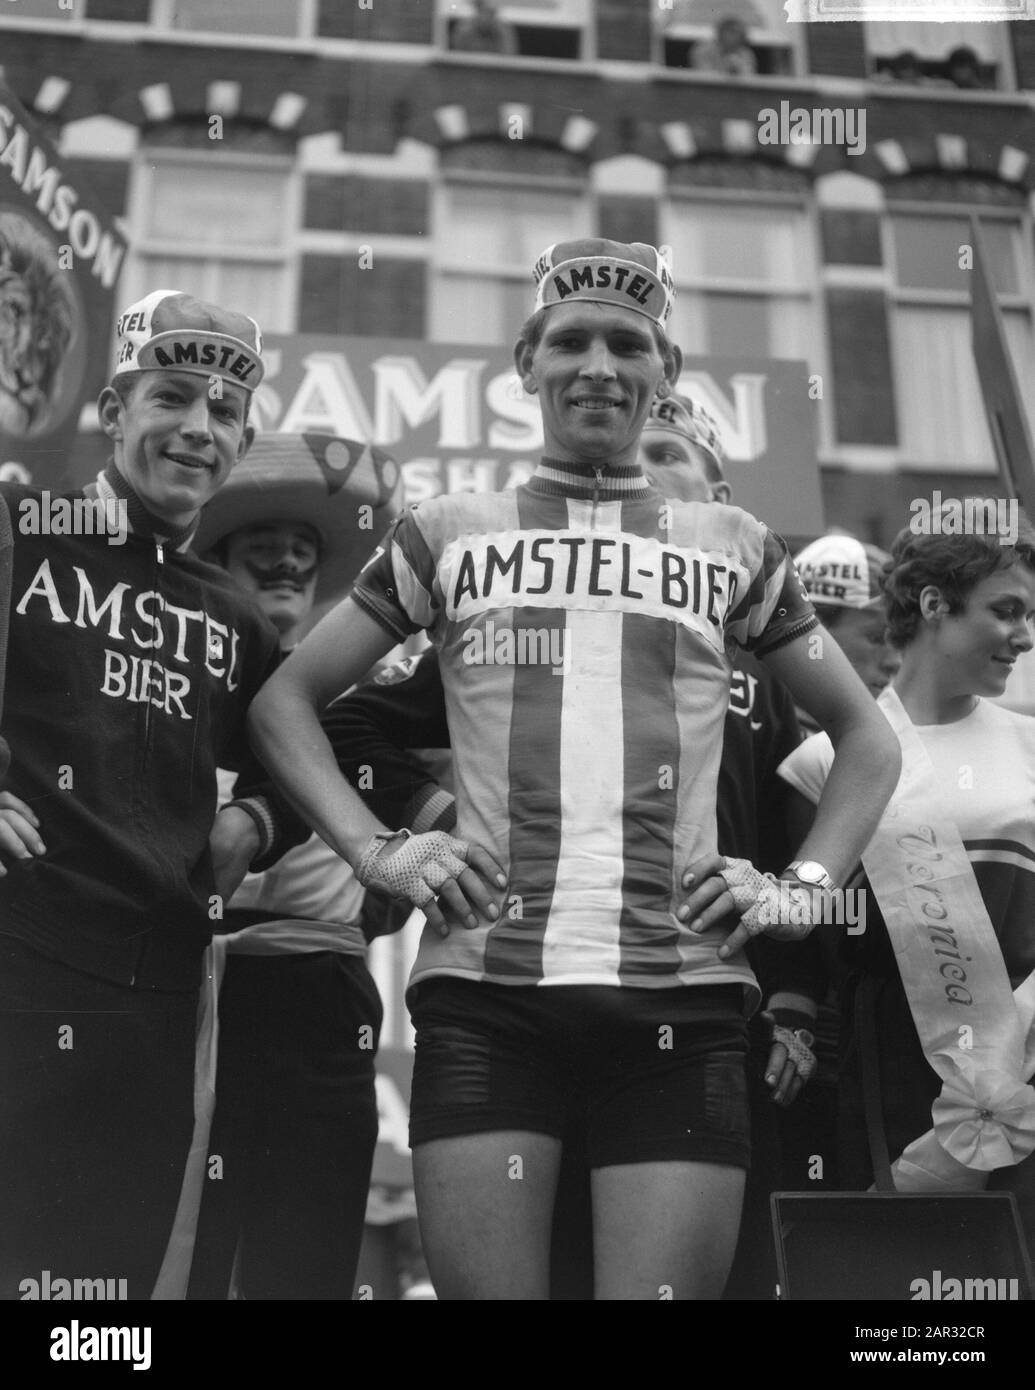 Olympia Tour seventh and last stage, Cor Schuuring Date: May 27, 1964  Location: Amsterdam, Noord-Holland Keywords: cyclists Personal name: Cor  Schuuring Institution name: Olympia's Ronde van Nederland Stock Photo -  Alamy